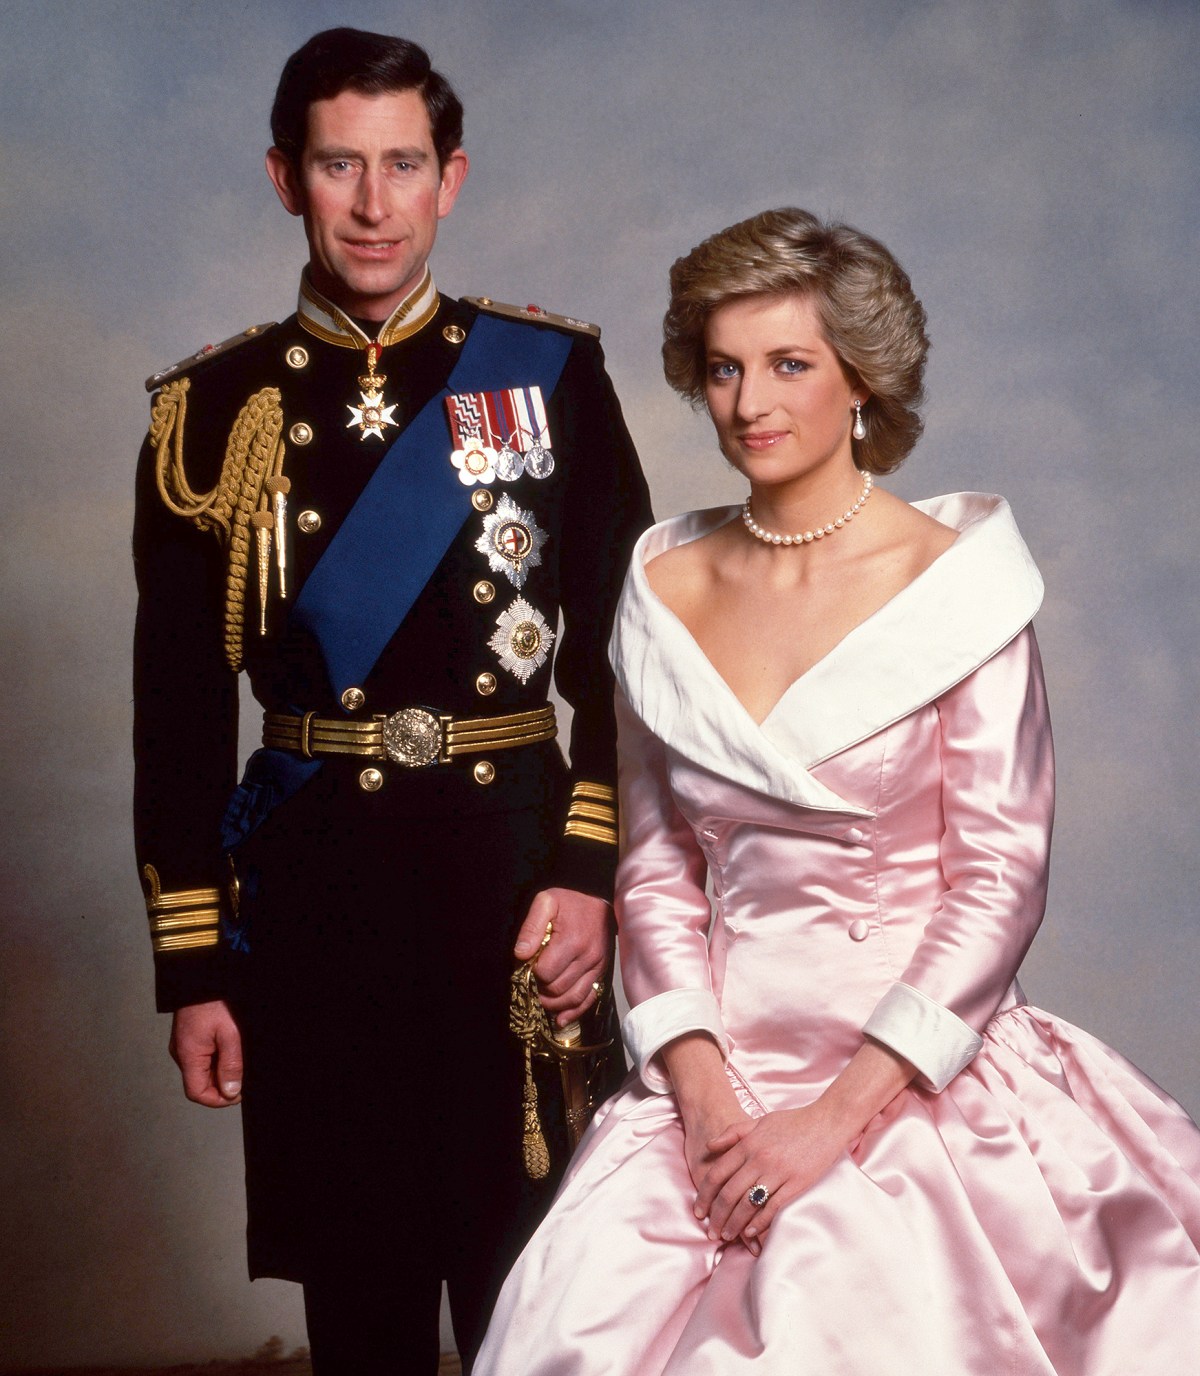 Princess Diana's Divorce From Prince Charles Was ‘Very Difficult’